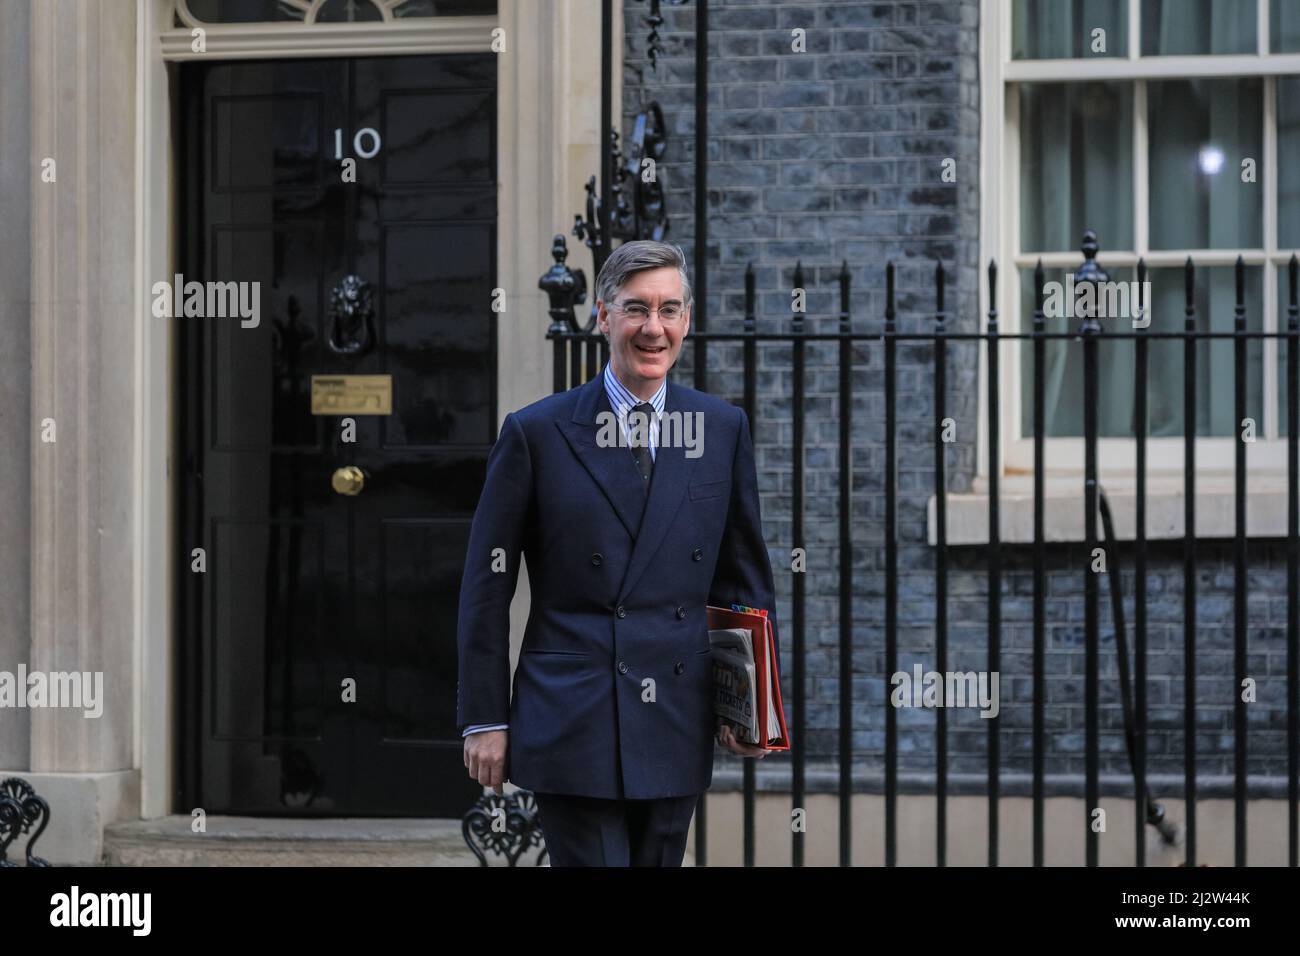 Jacob Rees-Mogg MP, Lord President of the Council, Leader of the House of Commons,  exits 10 Downing Street, London, UK Stock Photo